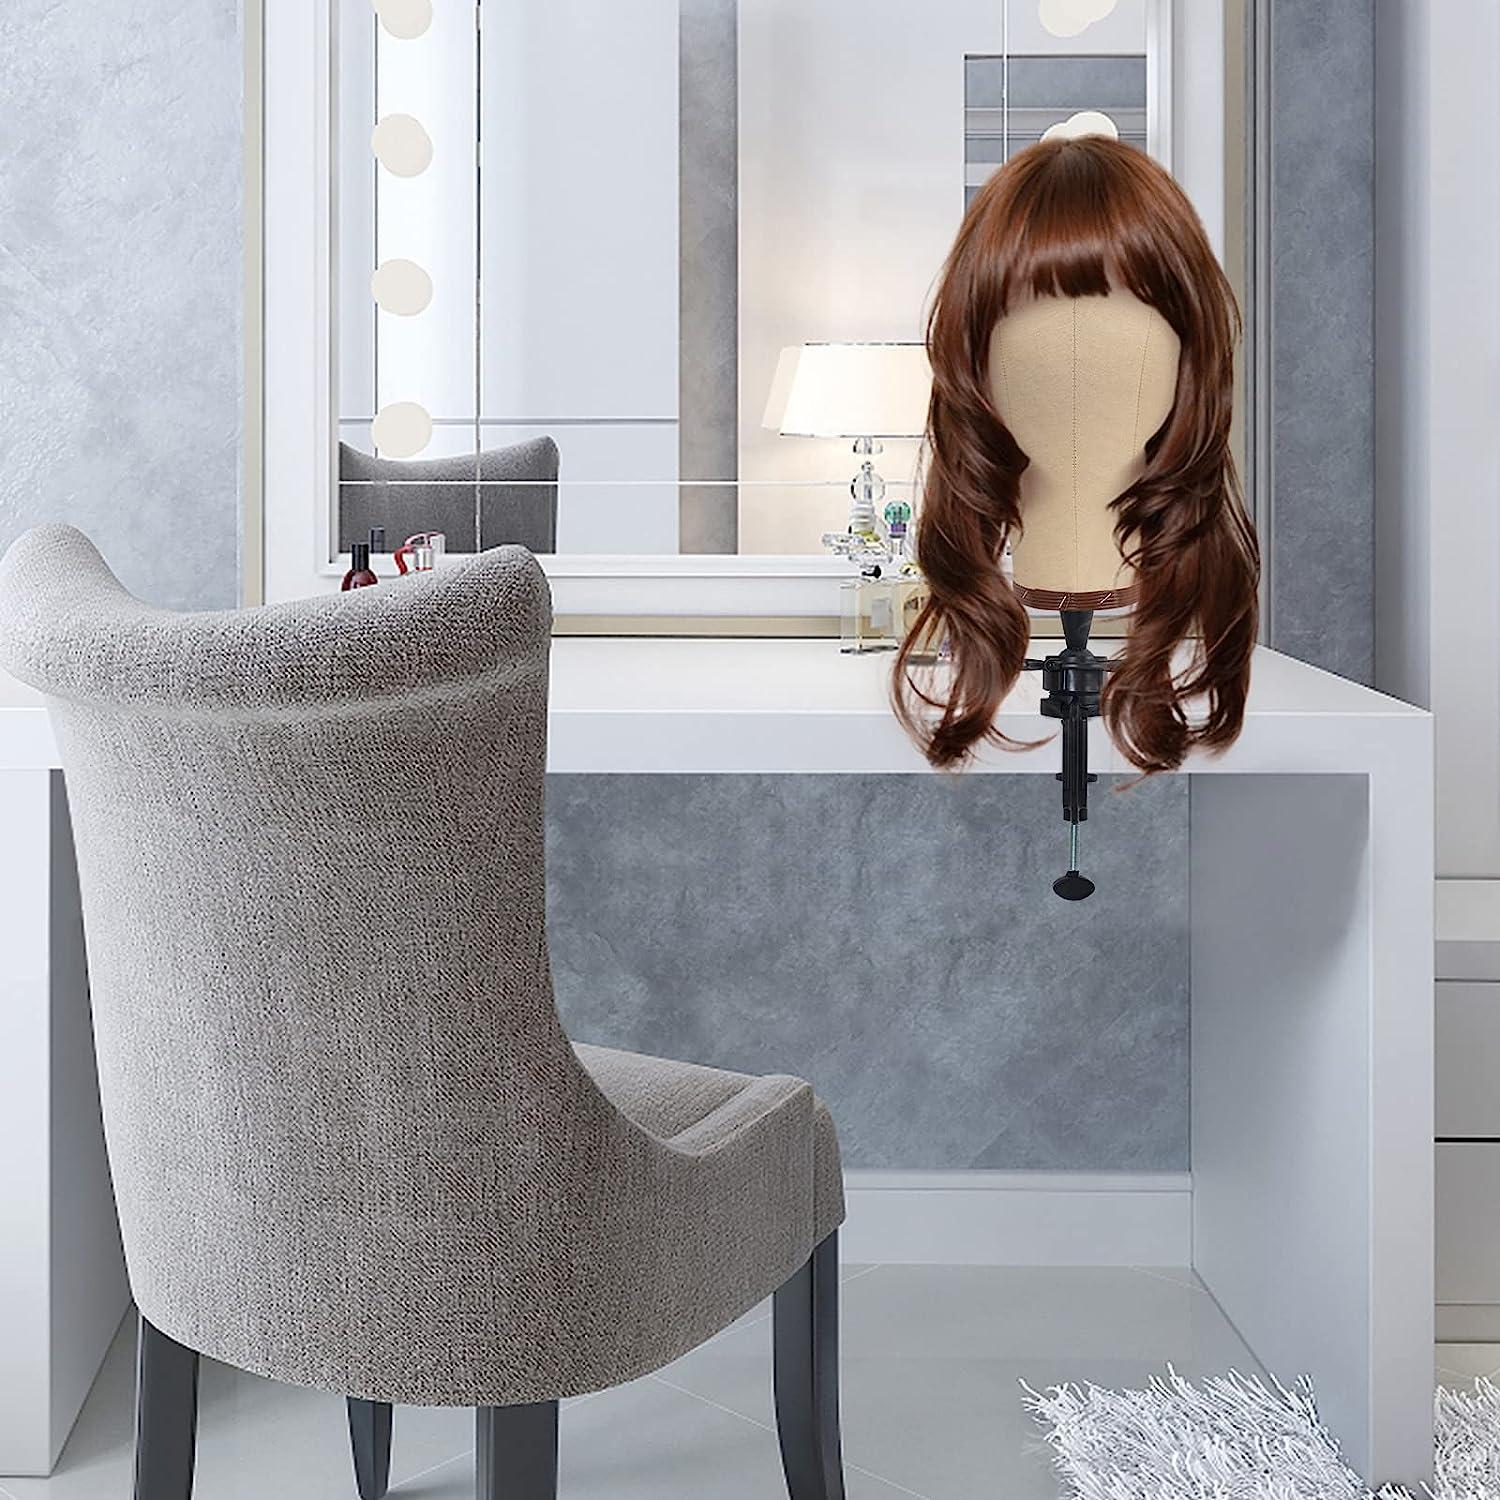 high quality wig mannequin head set